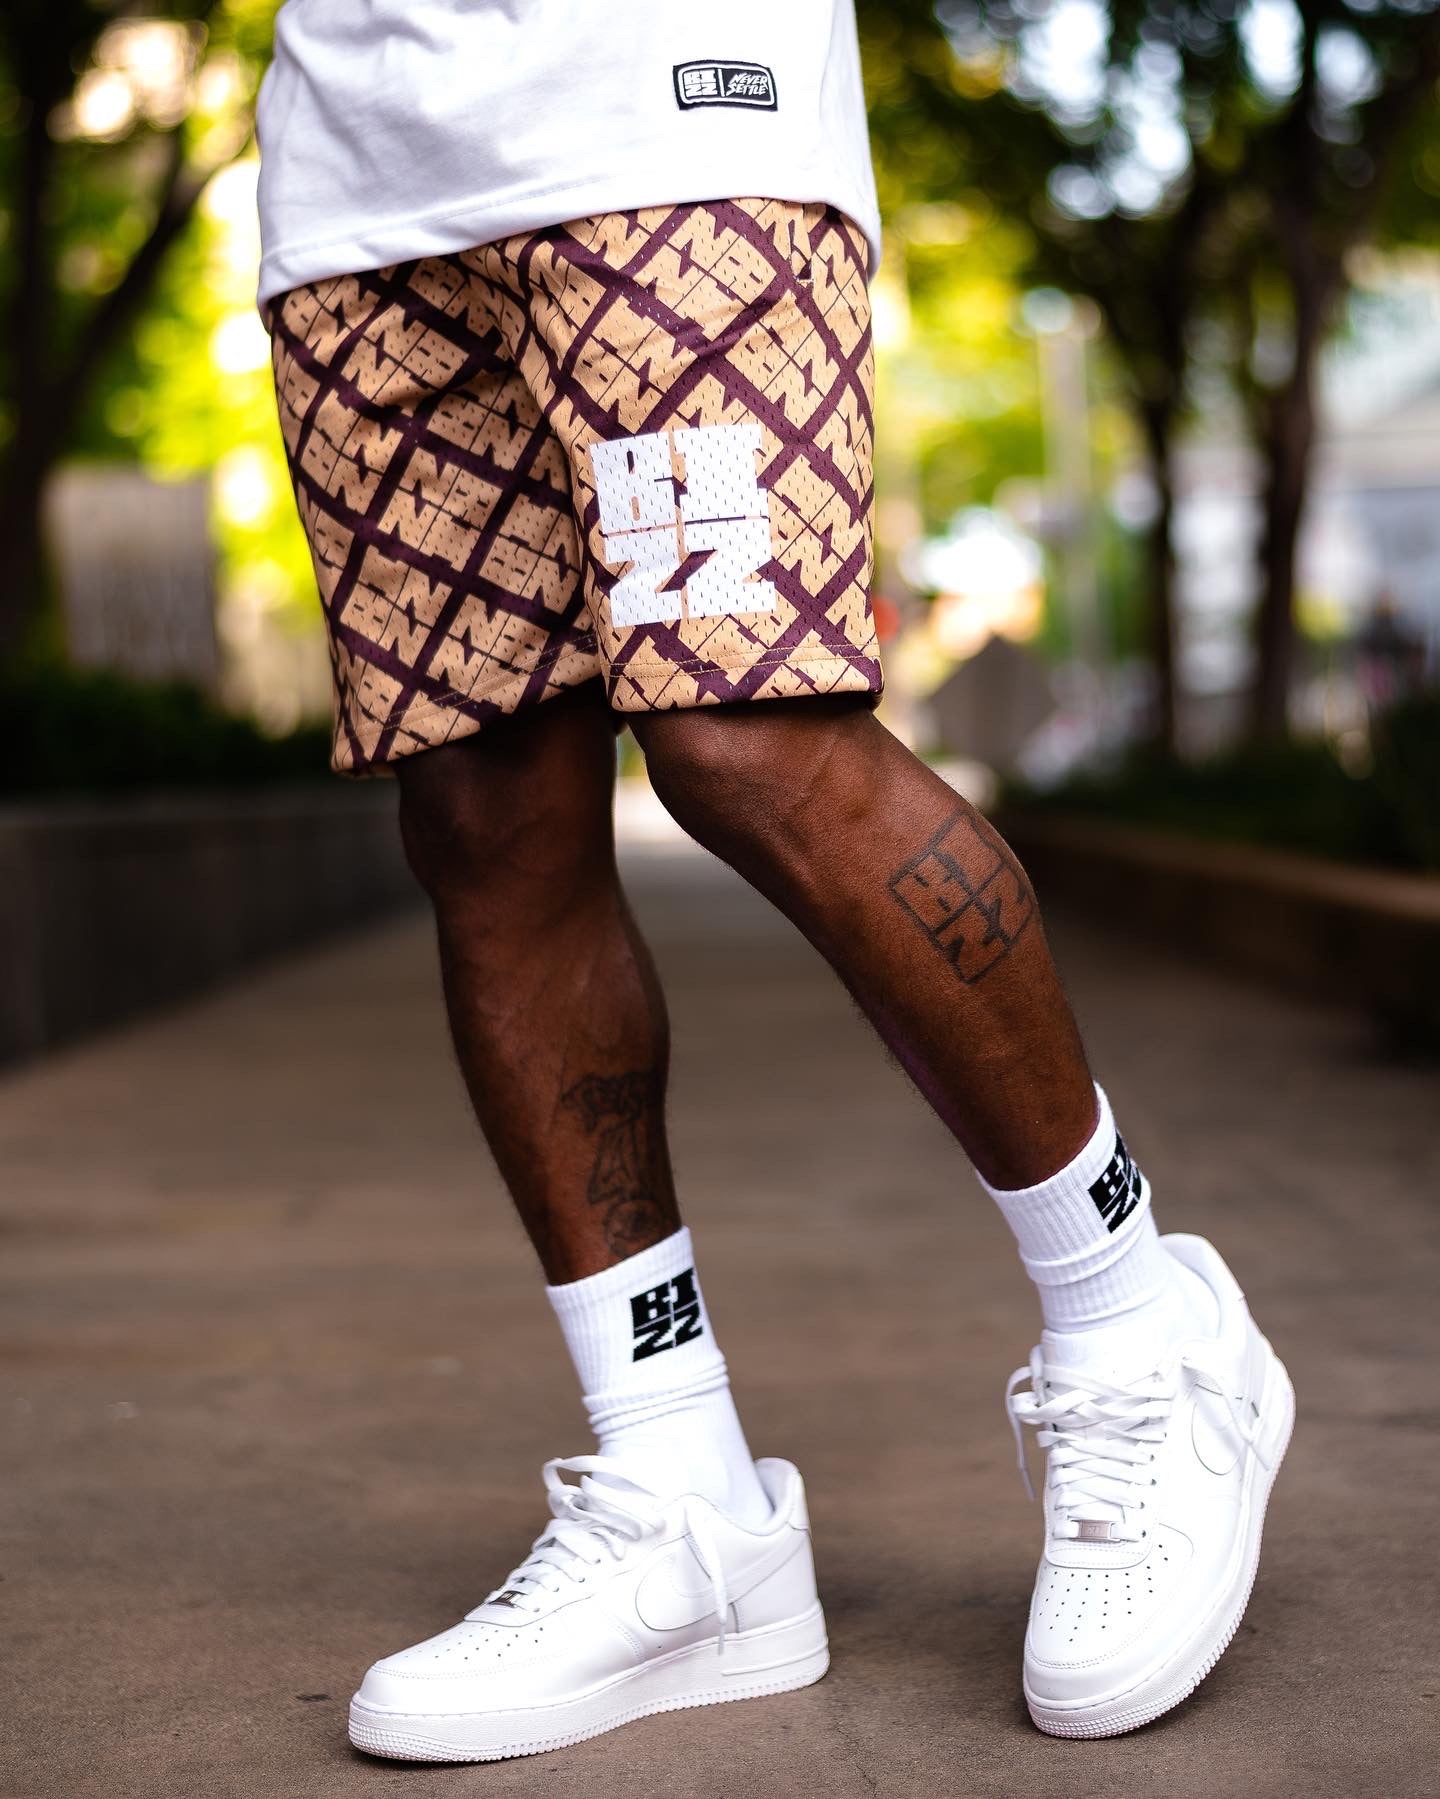 How I made these premium mesh shorts from scratch #clothingbrand  #meshshorts #loungewear #streetwear #outfitinspiration